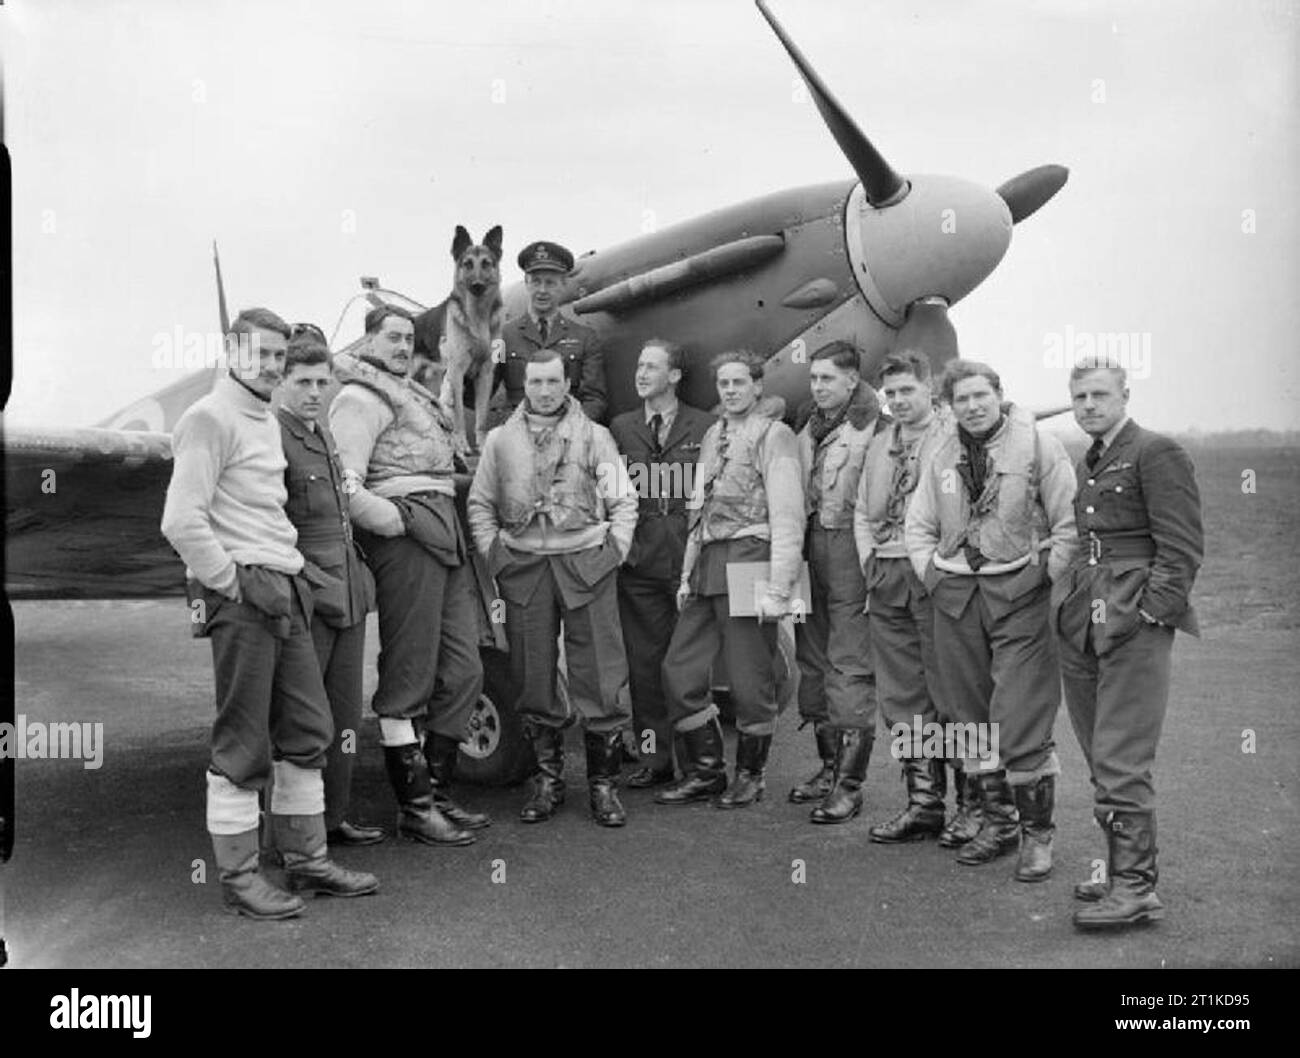 The Royal Air Force Fighter Command, 1939-1945. Pilots of No 54 Squadron RAF gathered round a Supermarine Spitfire Mark IIA at Rochford, Kent. On the wing sits their Commanding Officer, Squadron Leader, R F Boyd, with the squadron mascot 'Crash'. Boyd had at this time destroyed 14 enemy aircraft. At the end of July 1941, he was promoted wing leader of the Kenley Wing, and by the end of his tour in the summer of 1942 had increased his score to at least 22.5 victories. Stock Photo